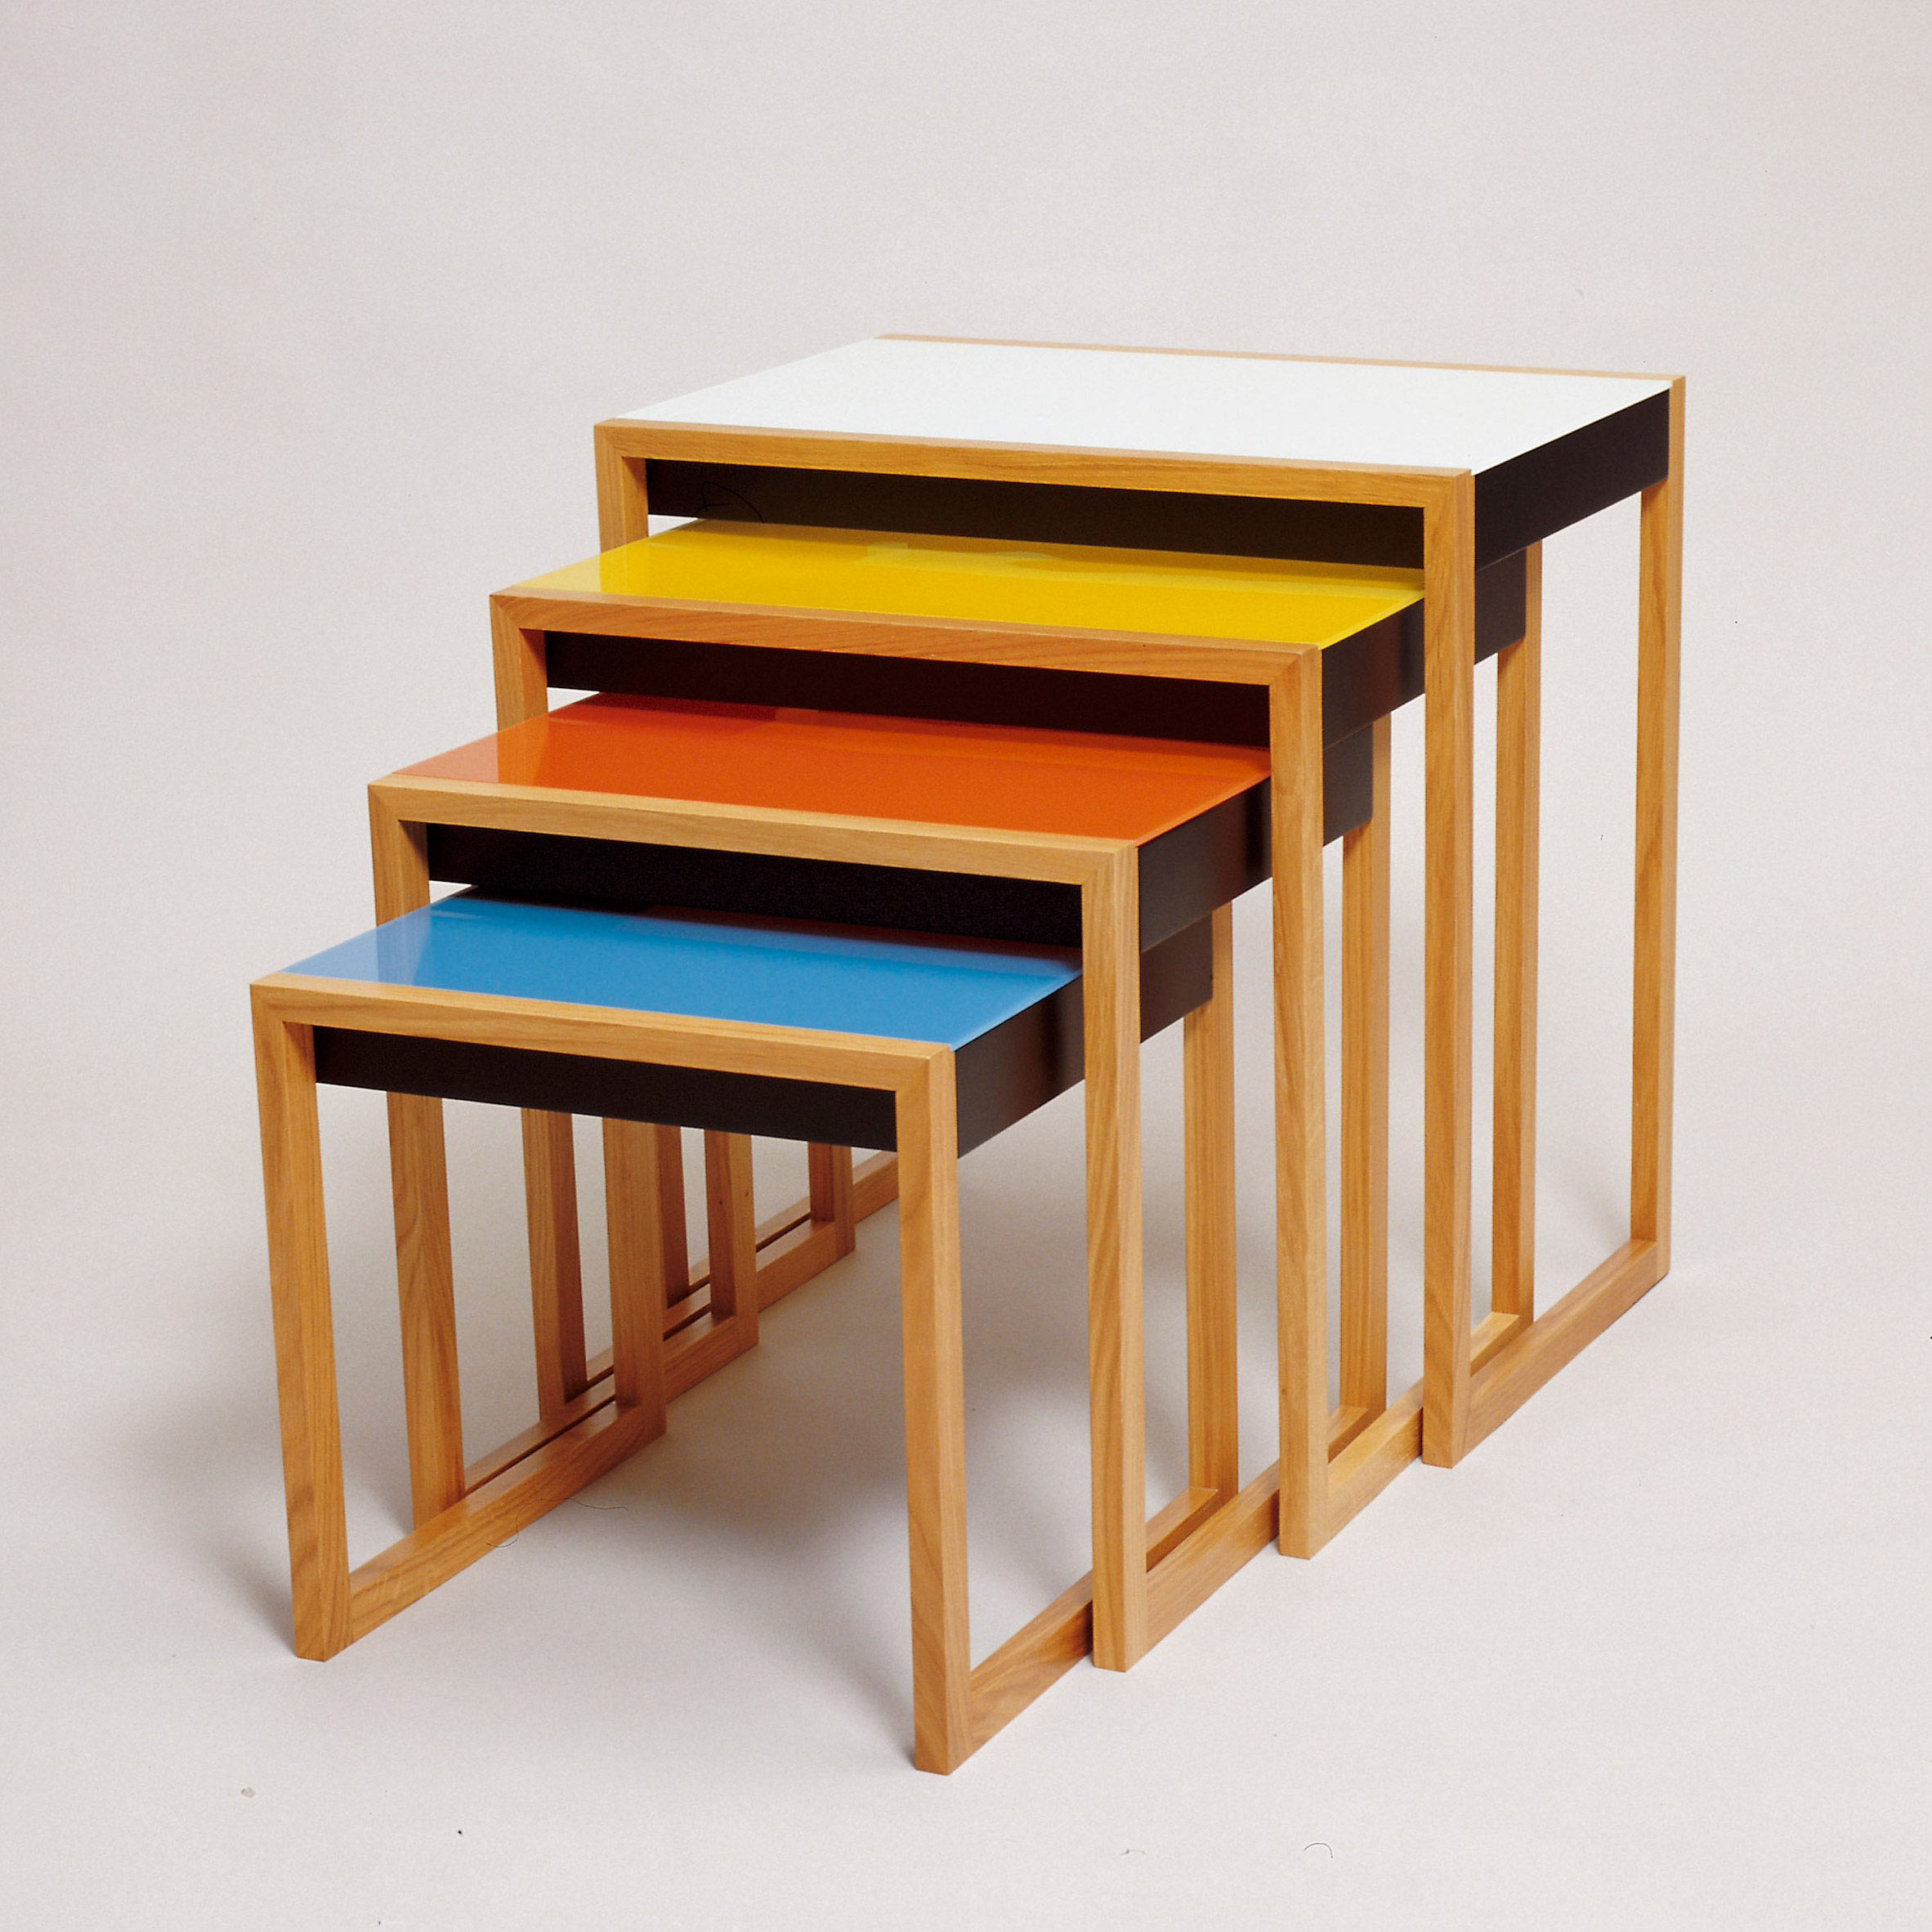 Stacking tables by Josef Albers, around 1927